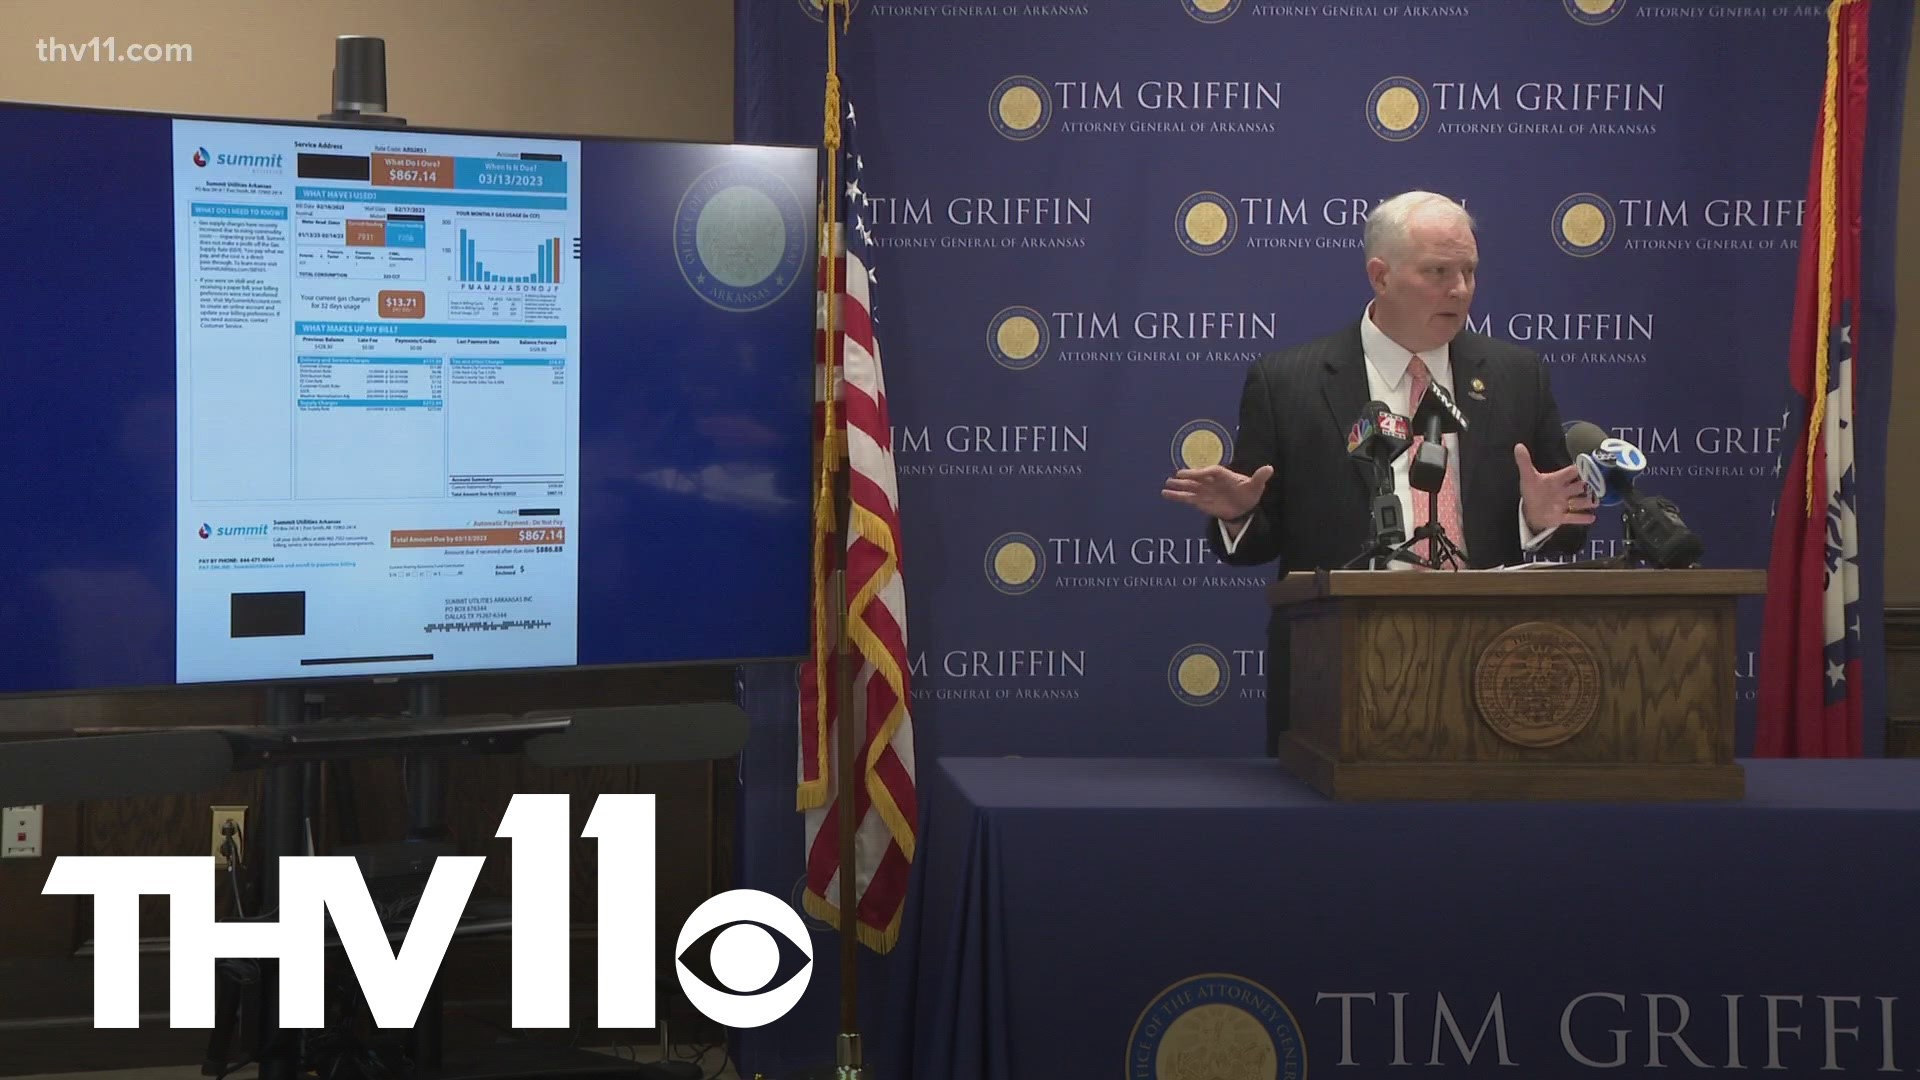 Earlier this year, Arkansas Attorney General Tim Griffin opened an investigation into Summit Utilities after receiving several complaints of outrageous bills.